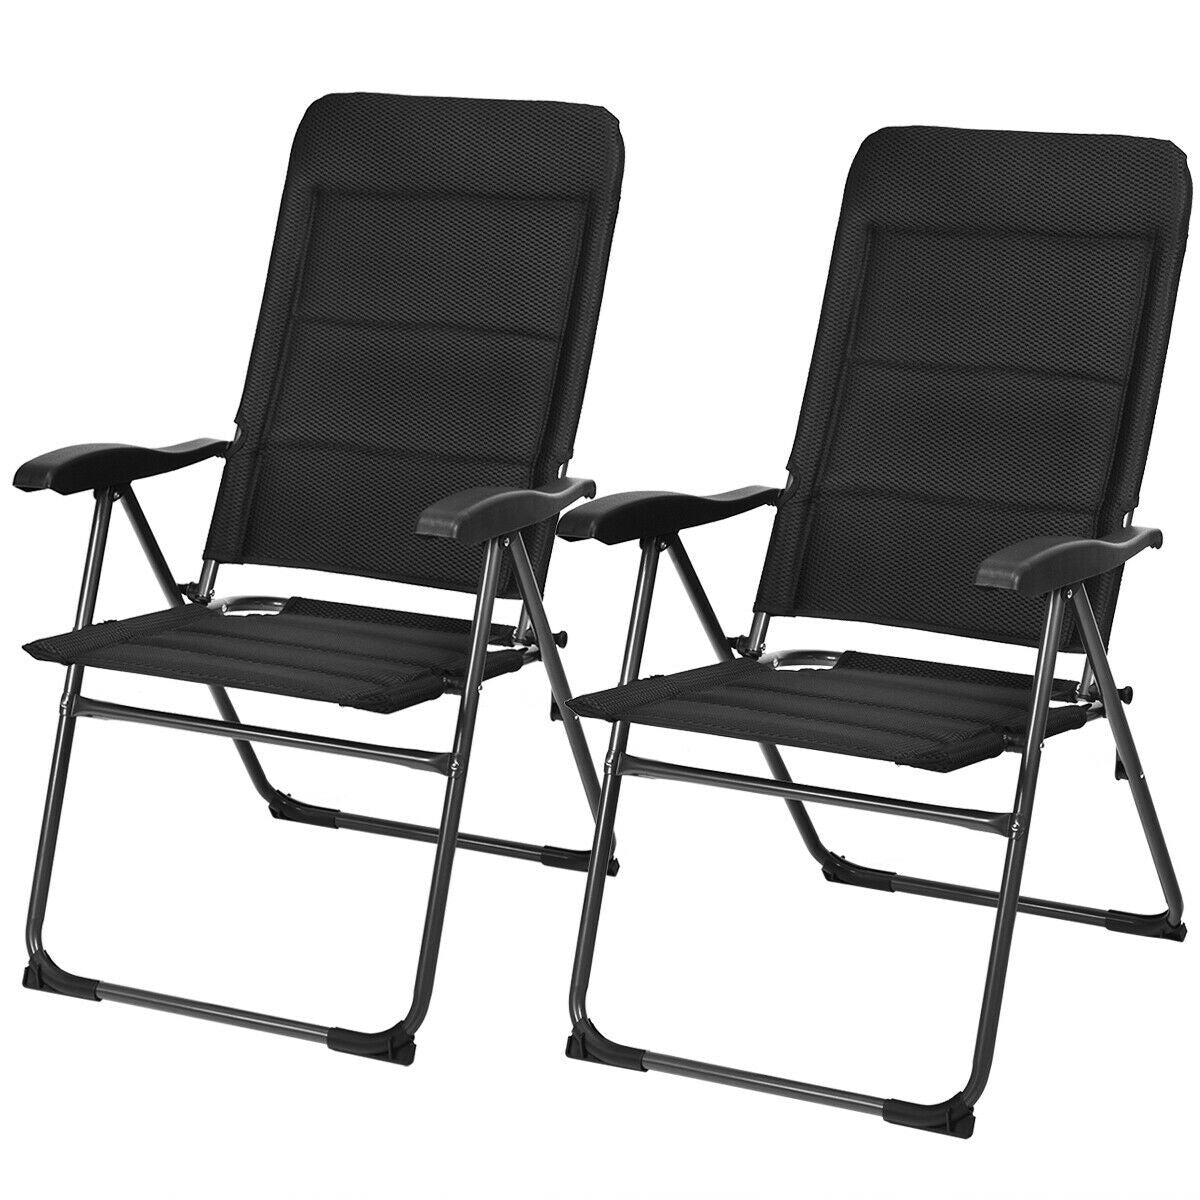 Set of 2 Patio Chairs, Folding Chairs with Adjustable Backrest